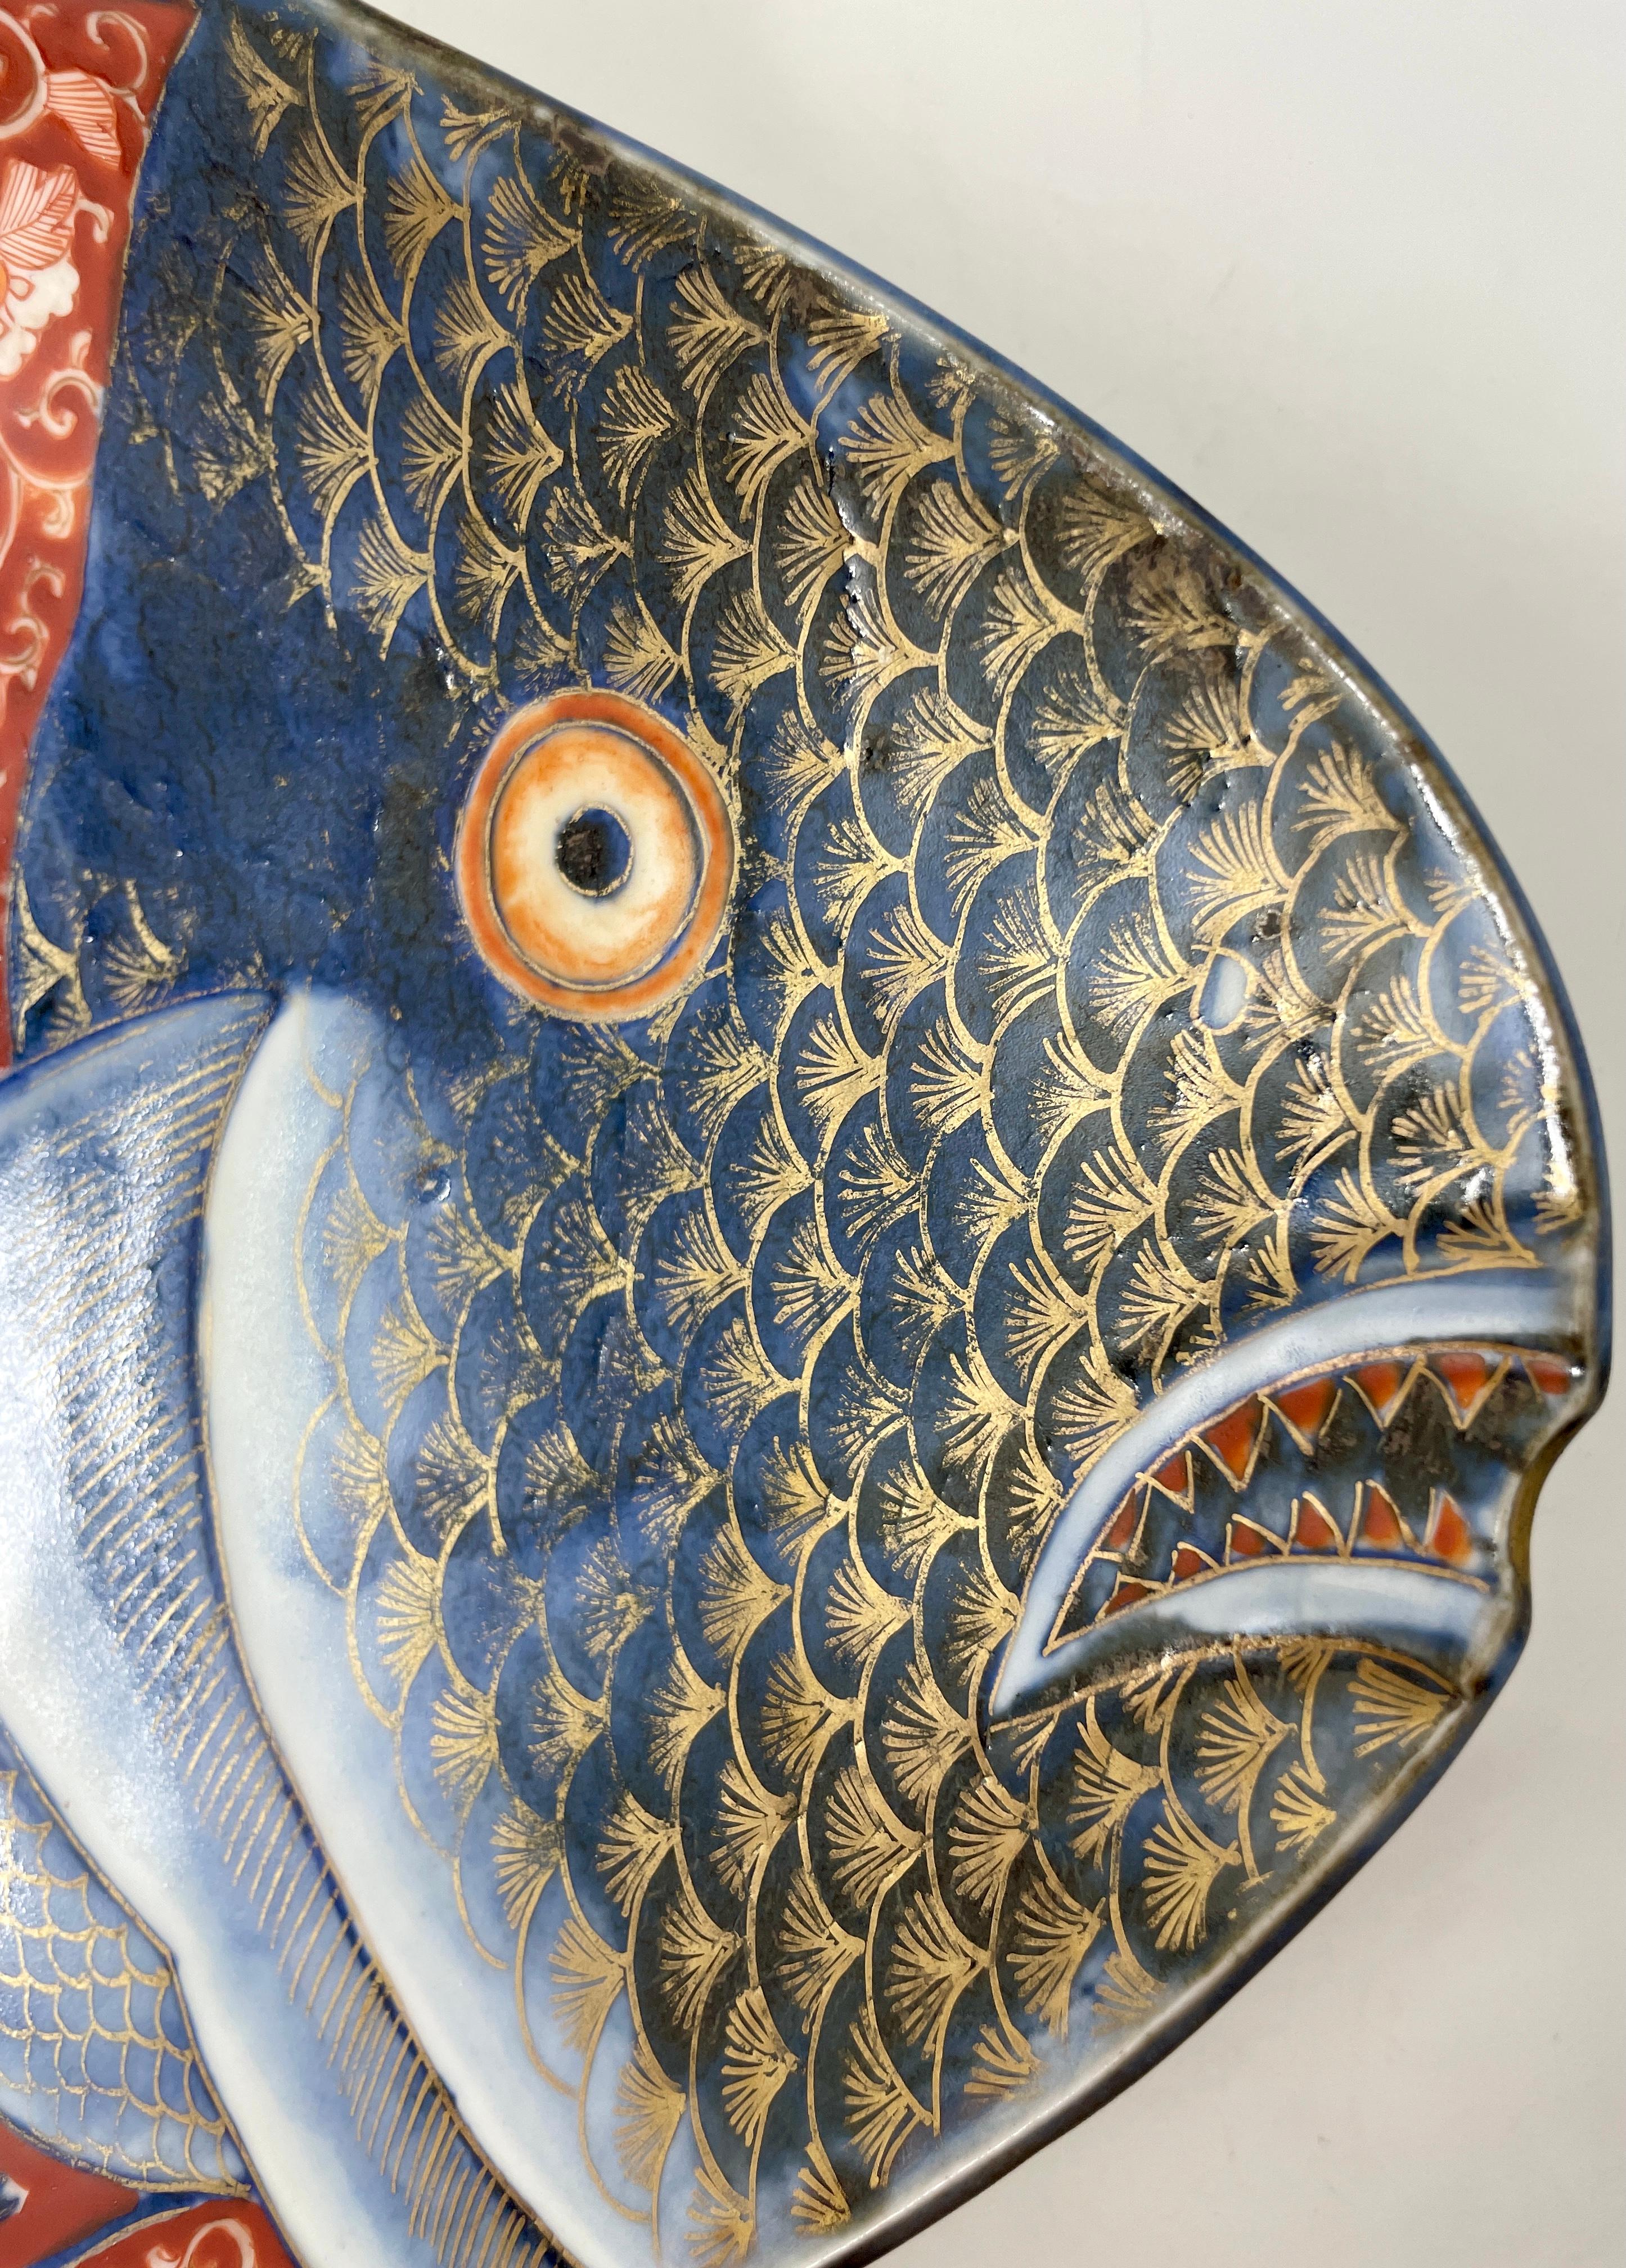 Antique Late 19th Century Japanese Porcelain Fish-Shaped Platter circa 1890-1910 In Good Condition For Sale In New Orleans, LA